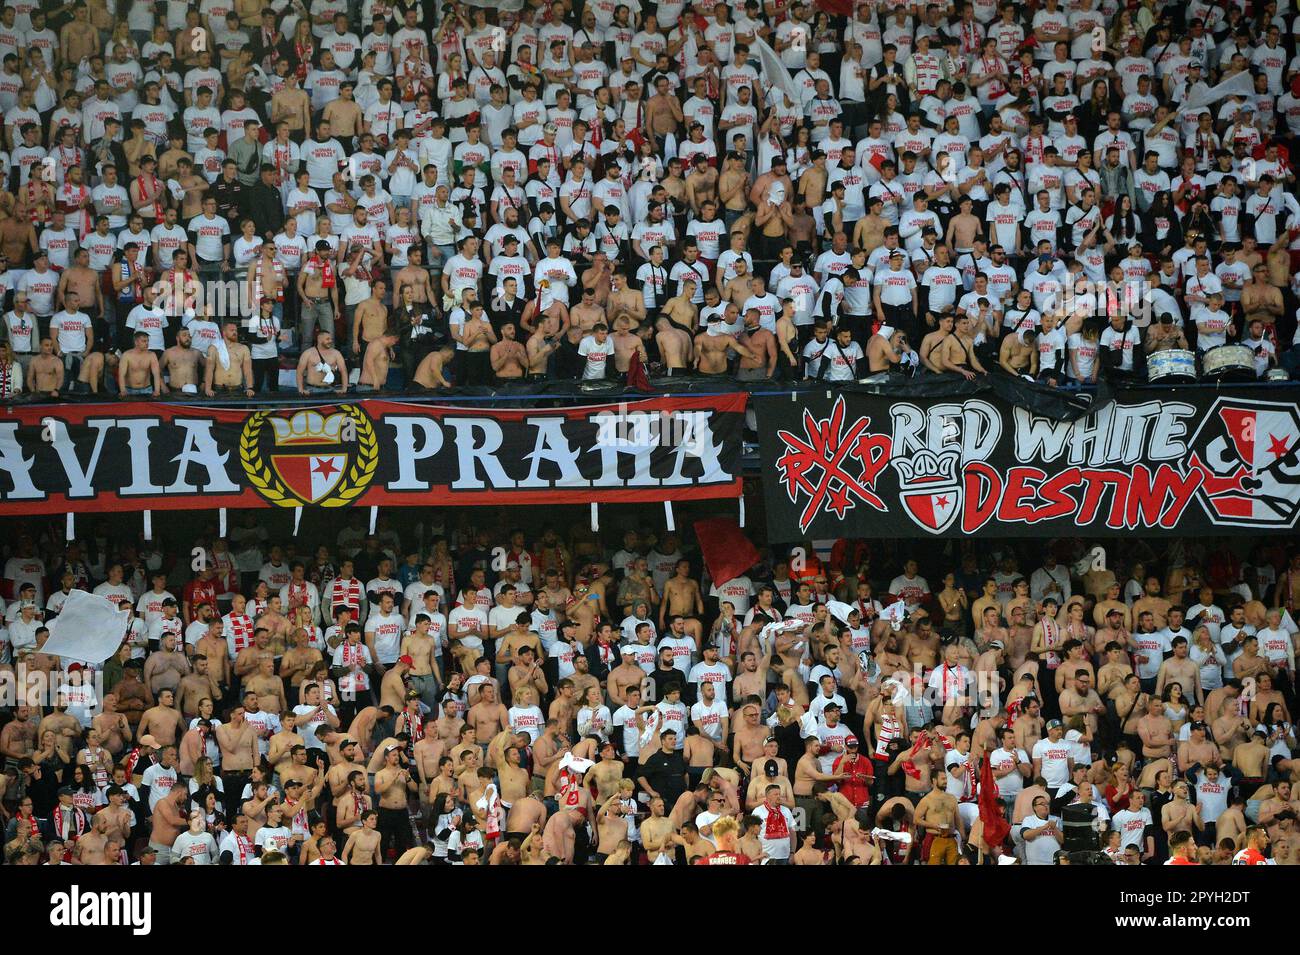 Slavia Prague Fans in the Stands Editorial Stock Photo - Image of